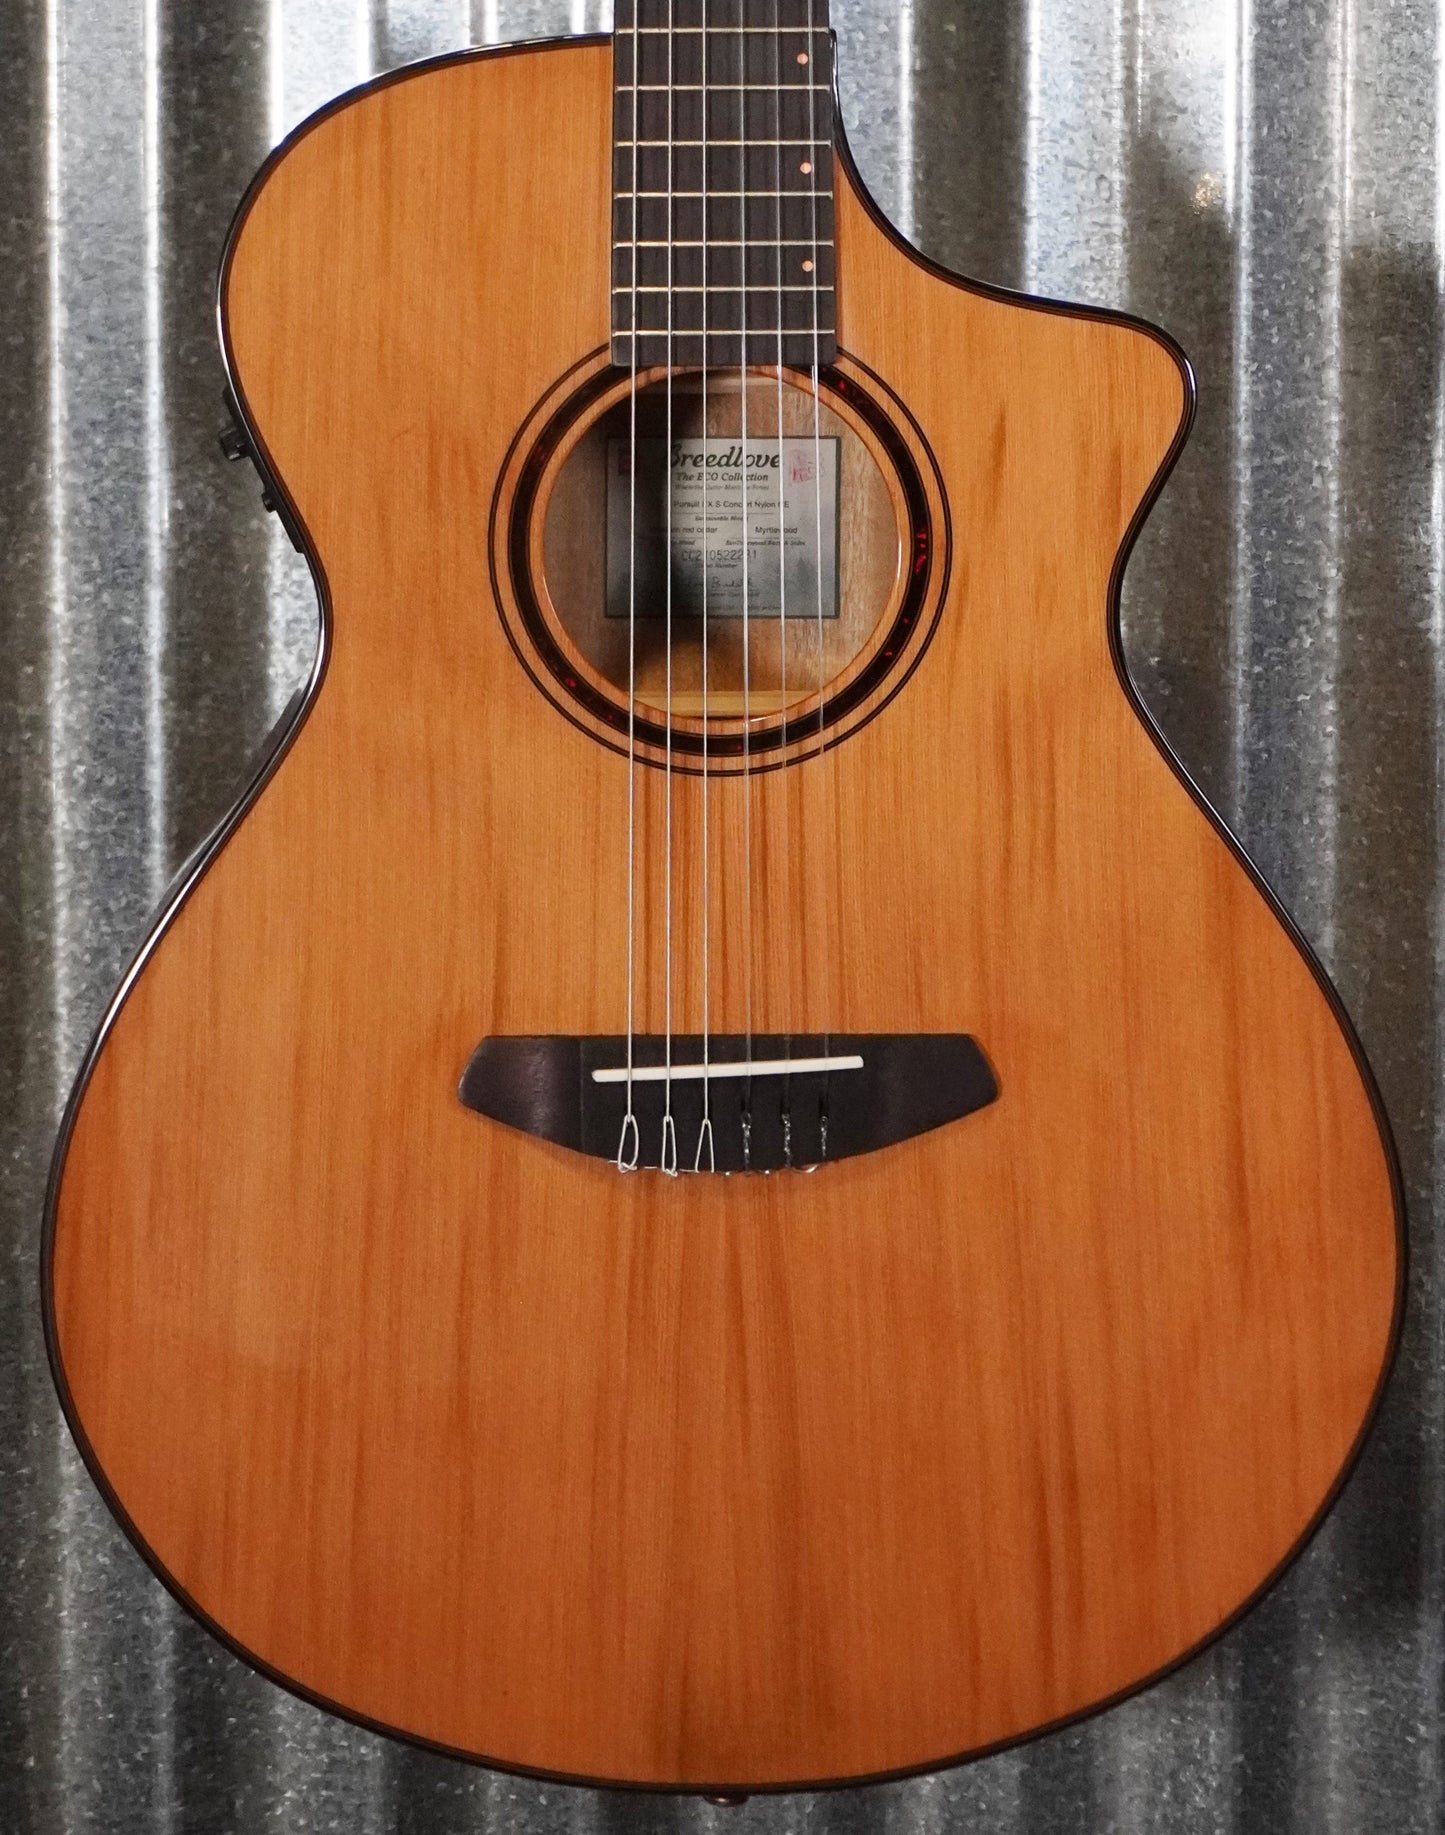 Breedlove Pursuit Exotic S Concert CE Nylon Acoustic Electric Guitar PSCN01NCERCMY #2231 Used